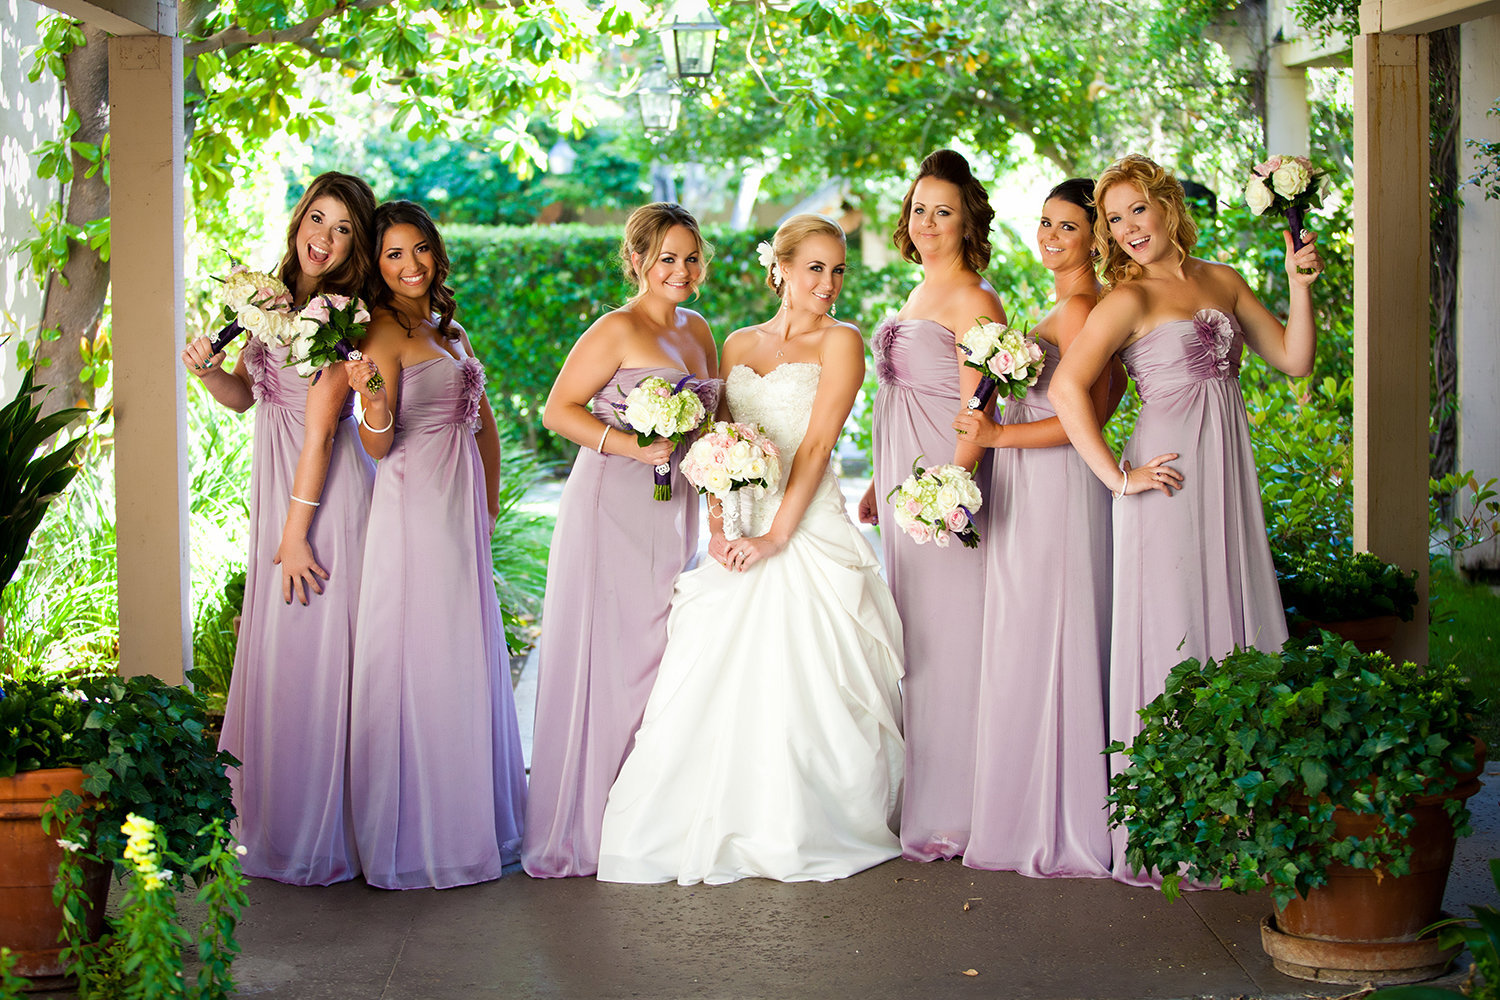 Bridesmaids posing ideas for a more natural look